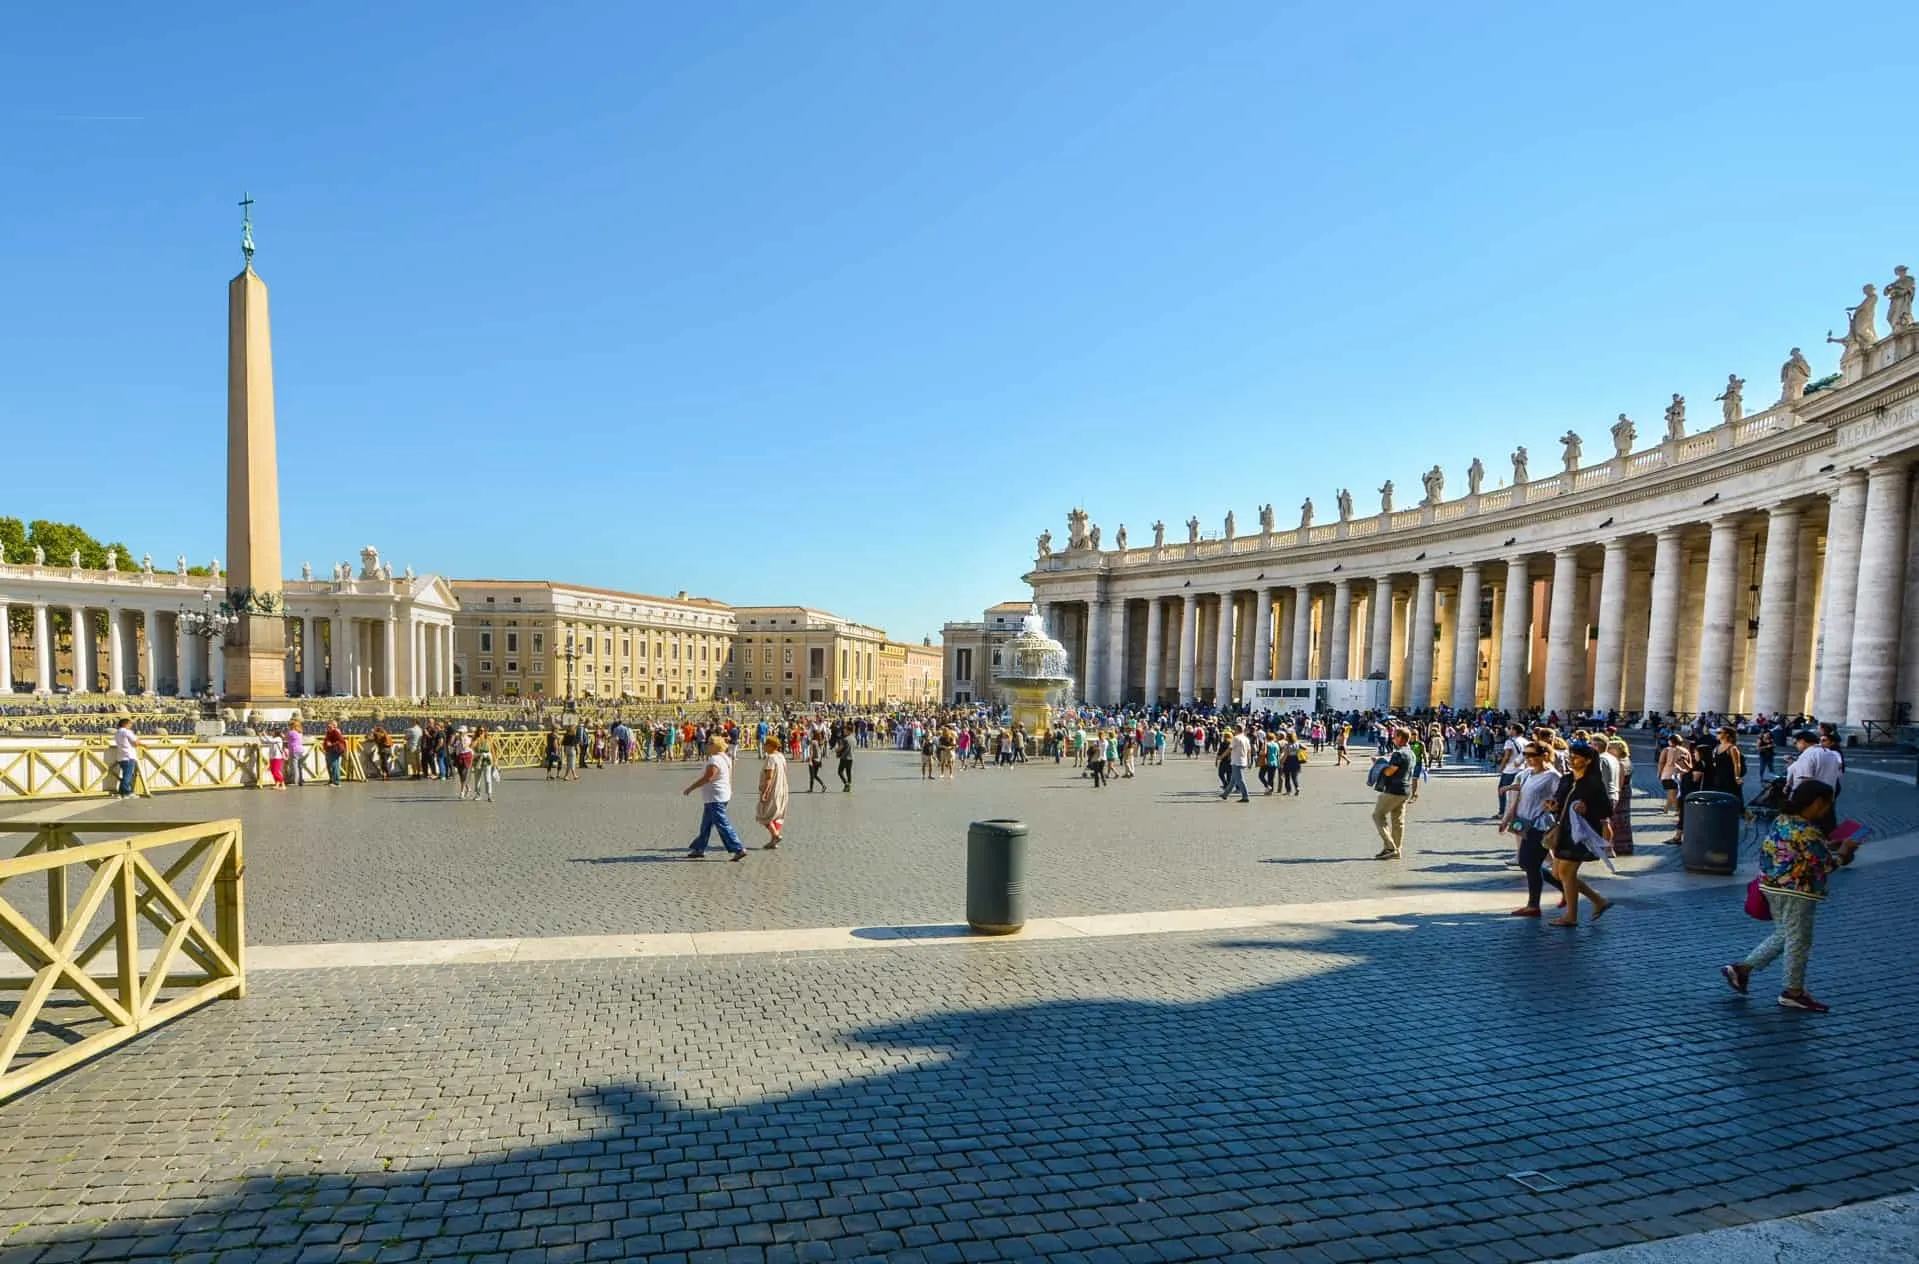 St. Peter's square facts